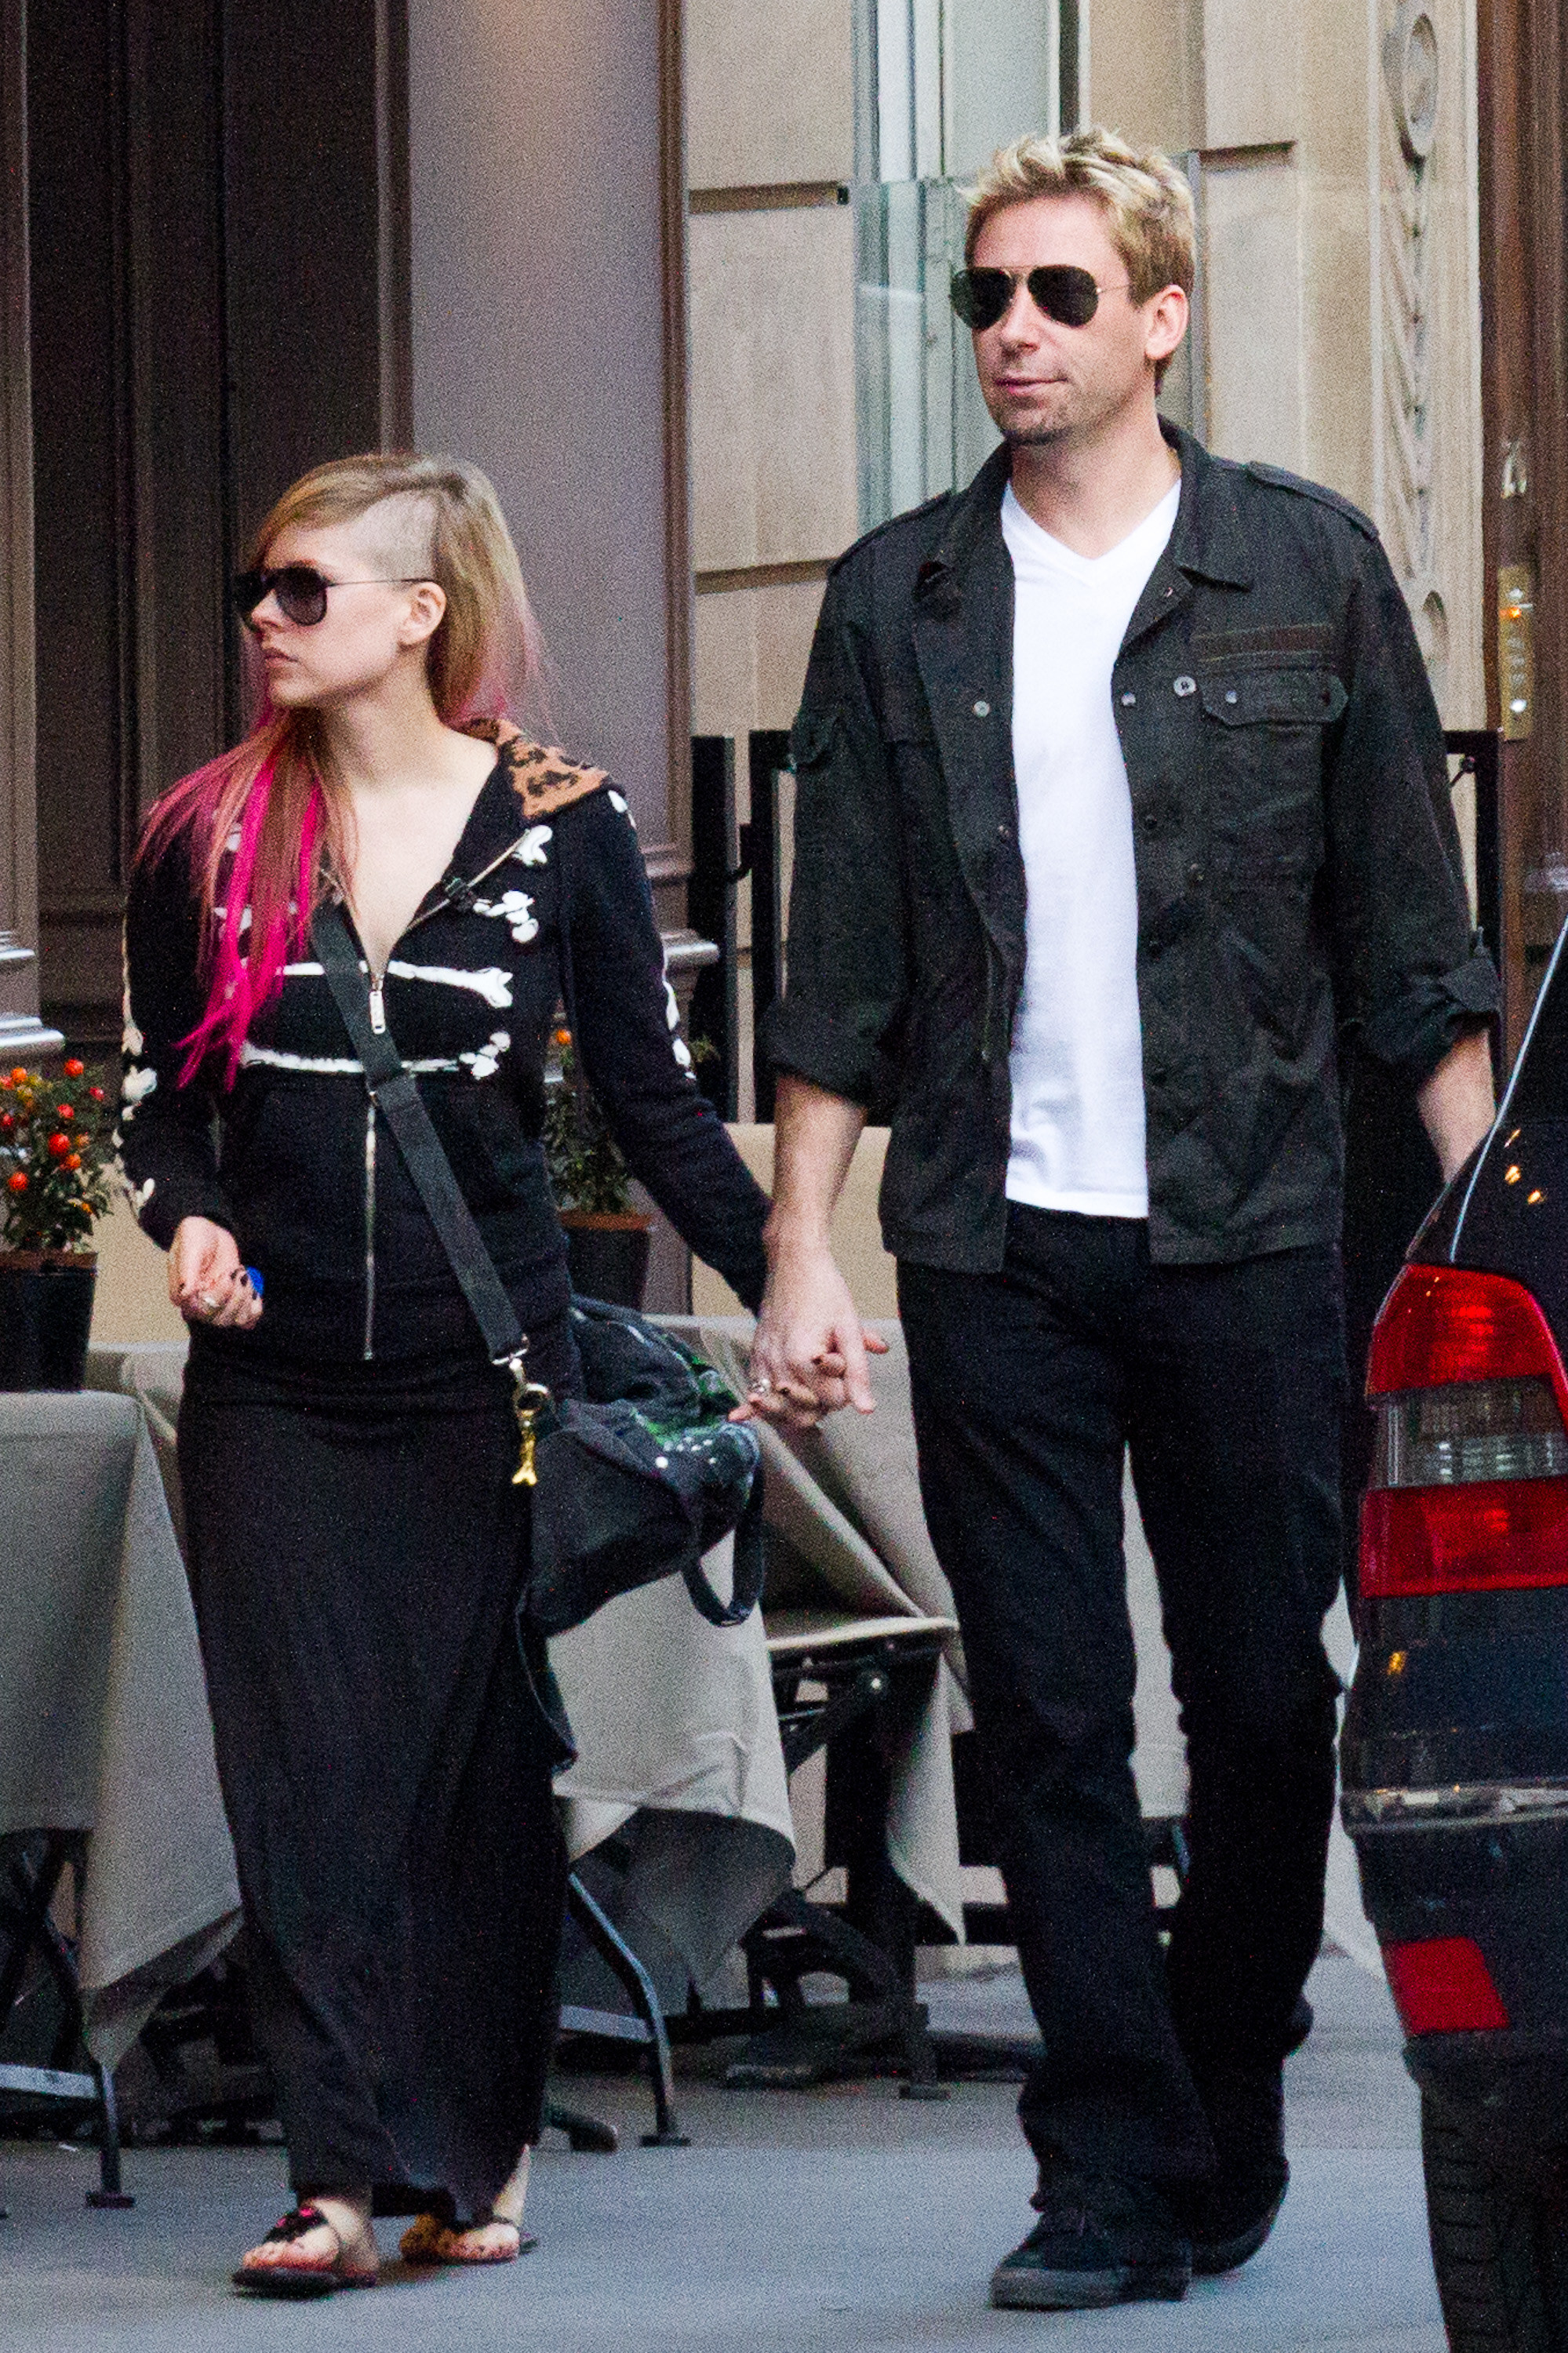 Avril Lavigne and Chad Kroeger holding hands